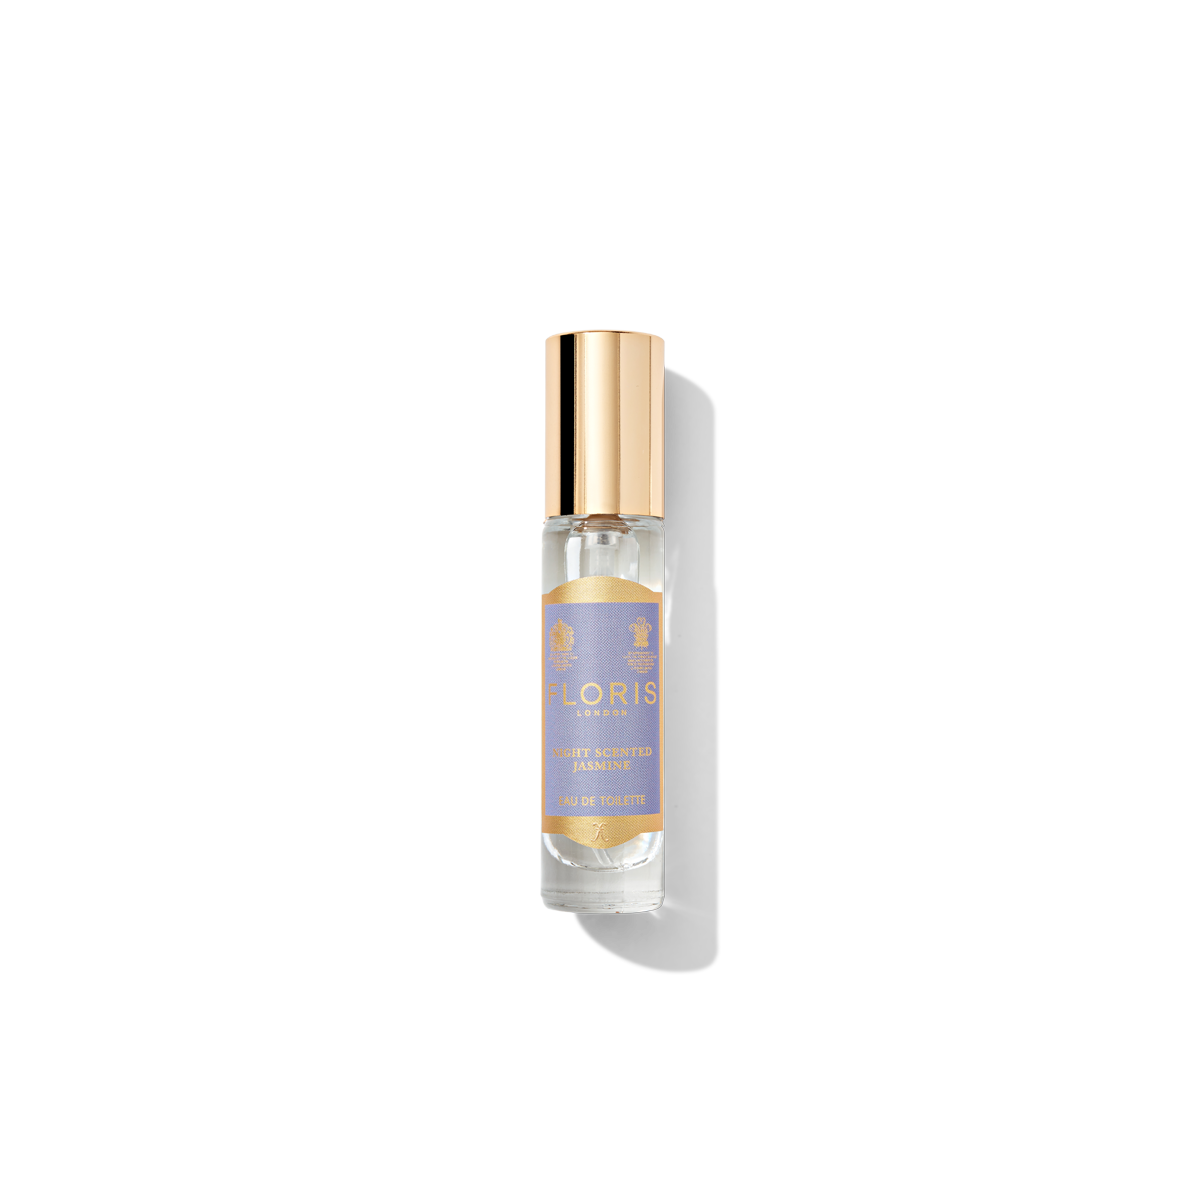 small glass spray atomiser with purple Night Scented Jasmine label